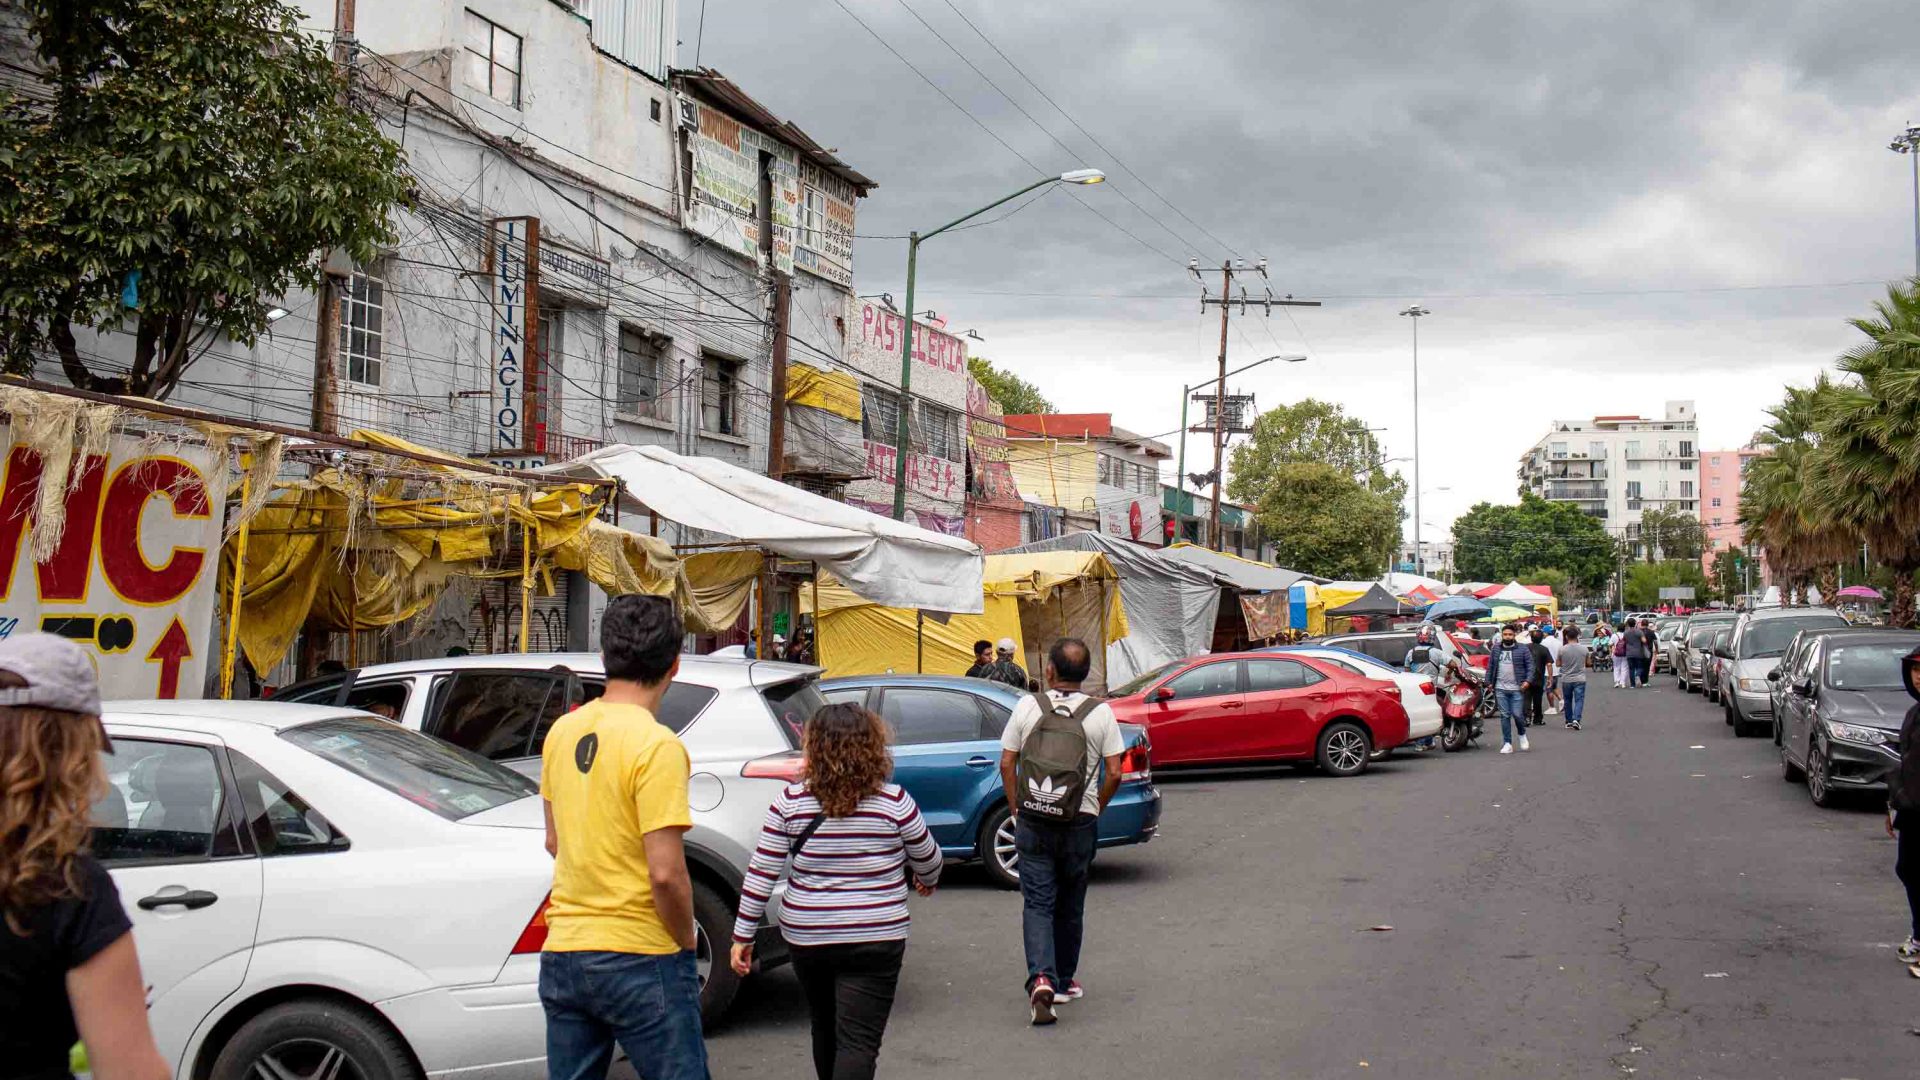 The street outside of the Tepito market show stalls, cars and people walking.